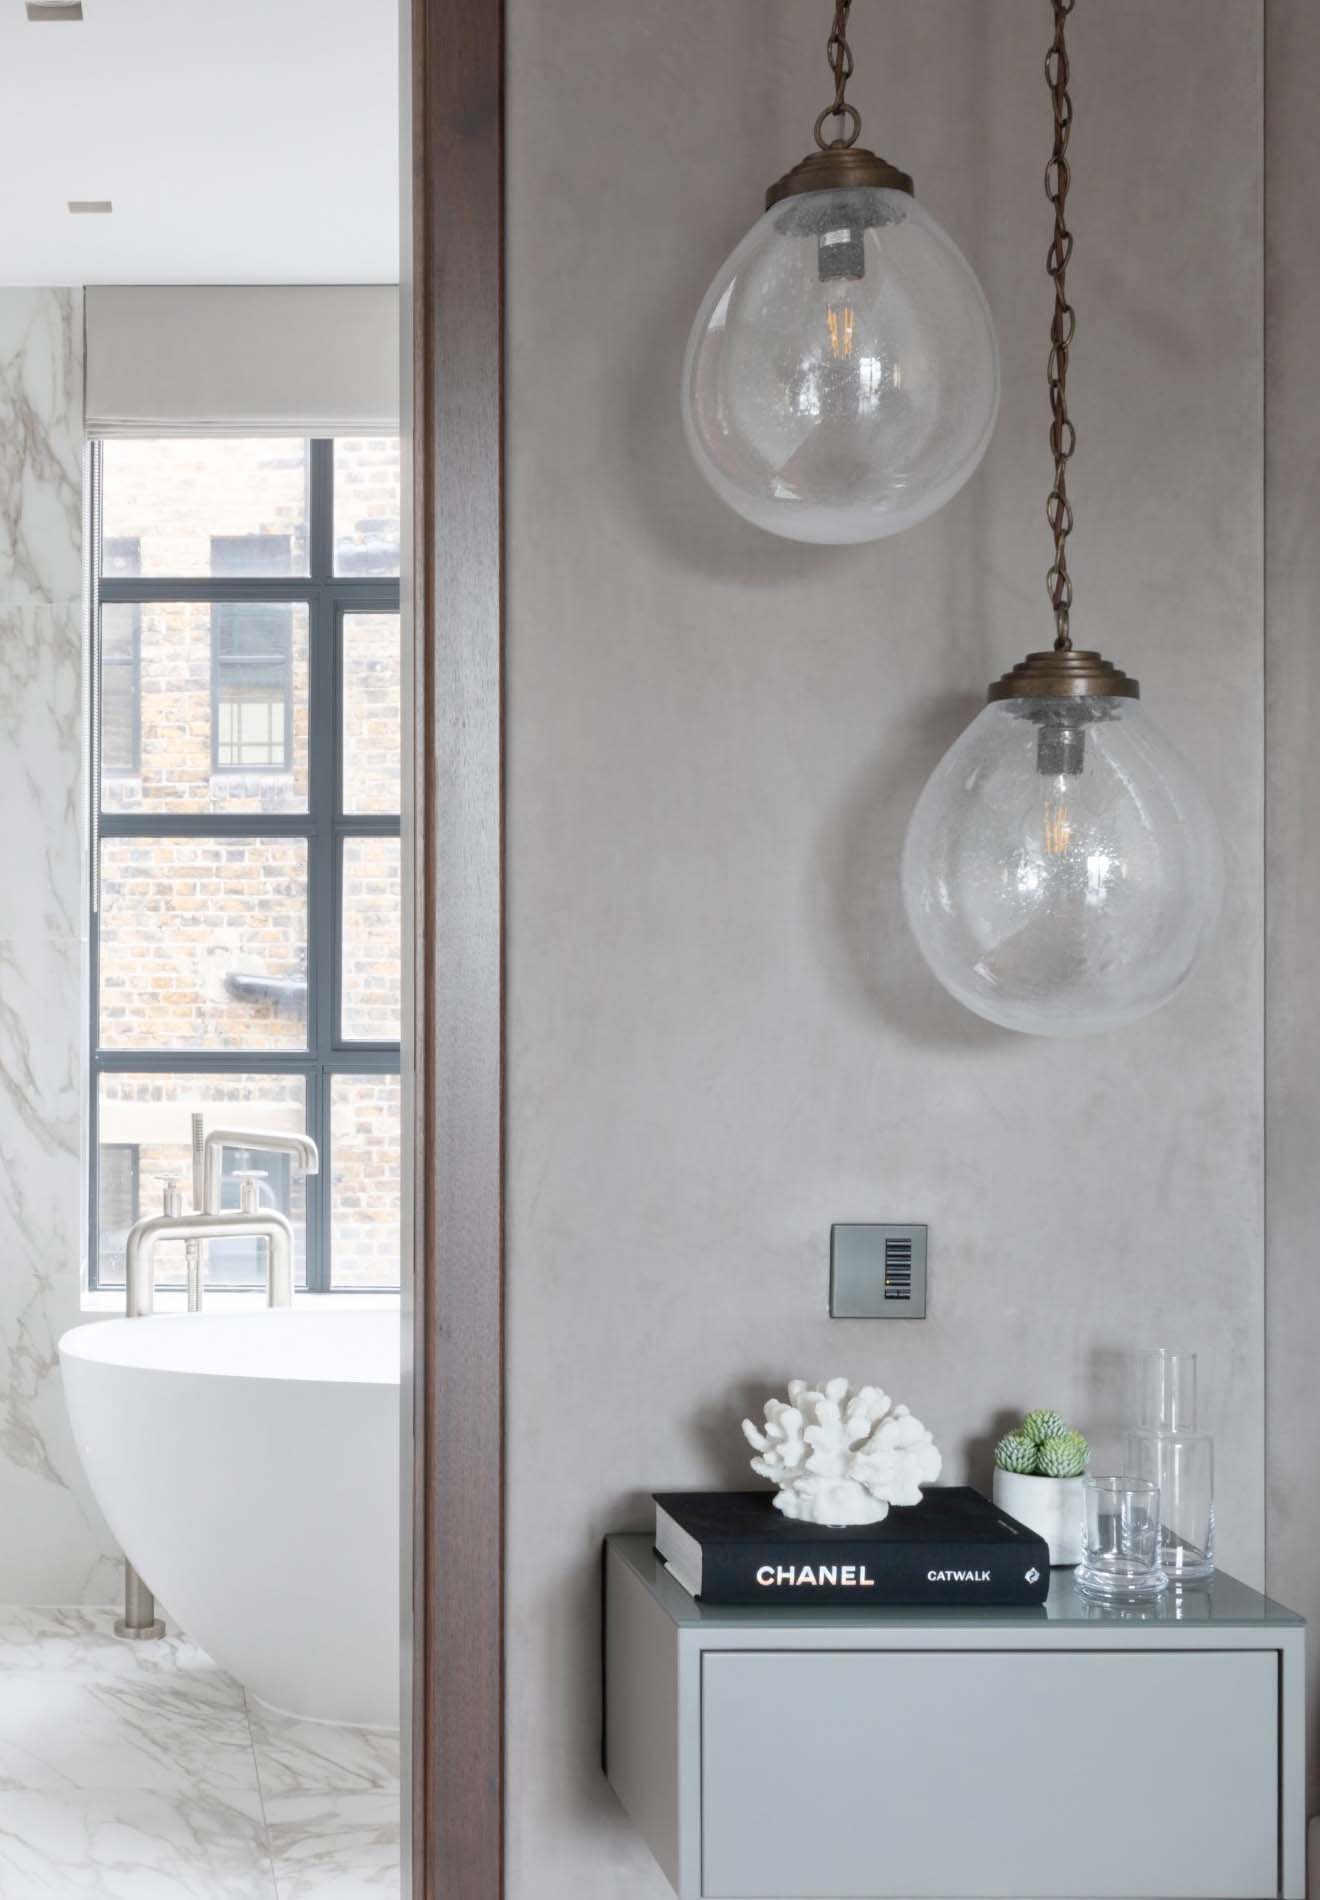 Porta Romana Large Orb pendant featured in JSRE Partners' Interiors, photography by Paul Craig